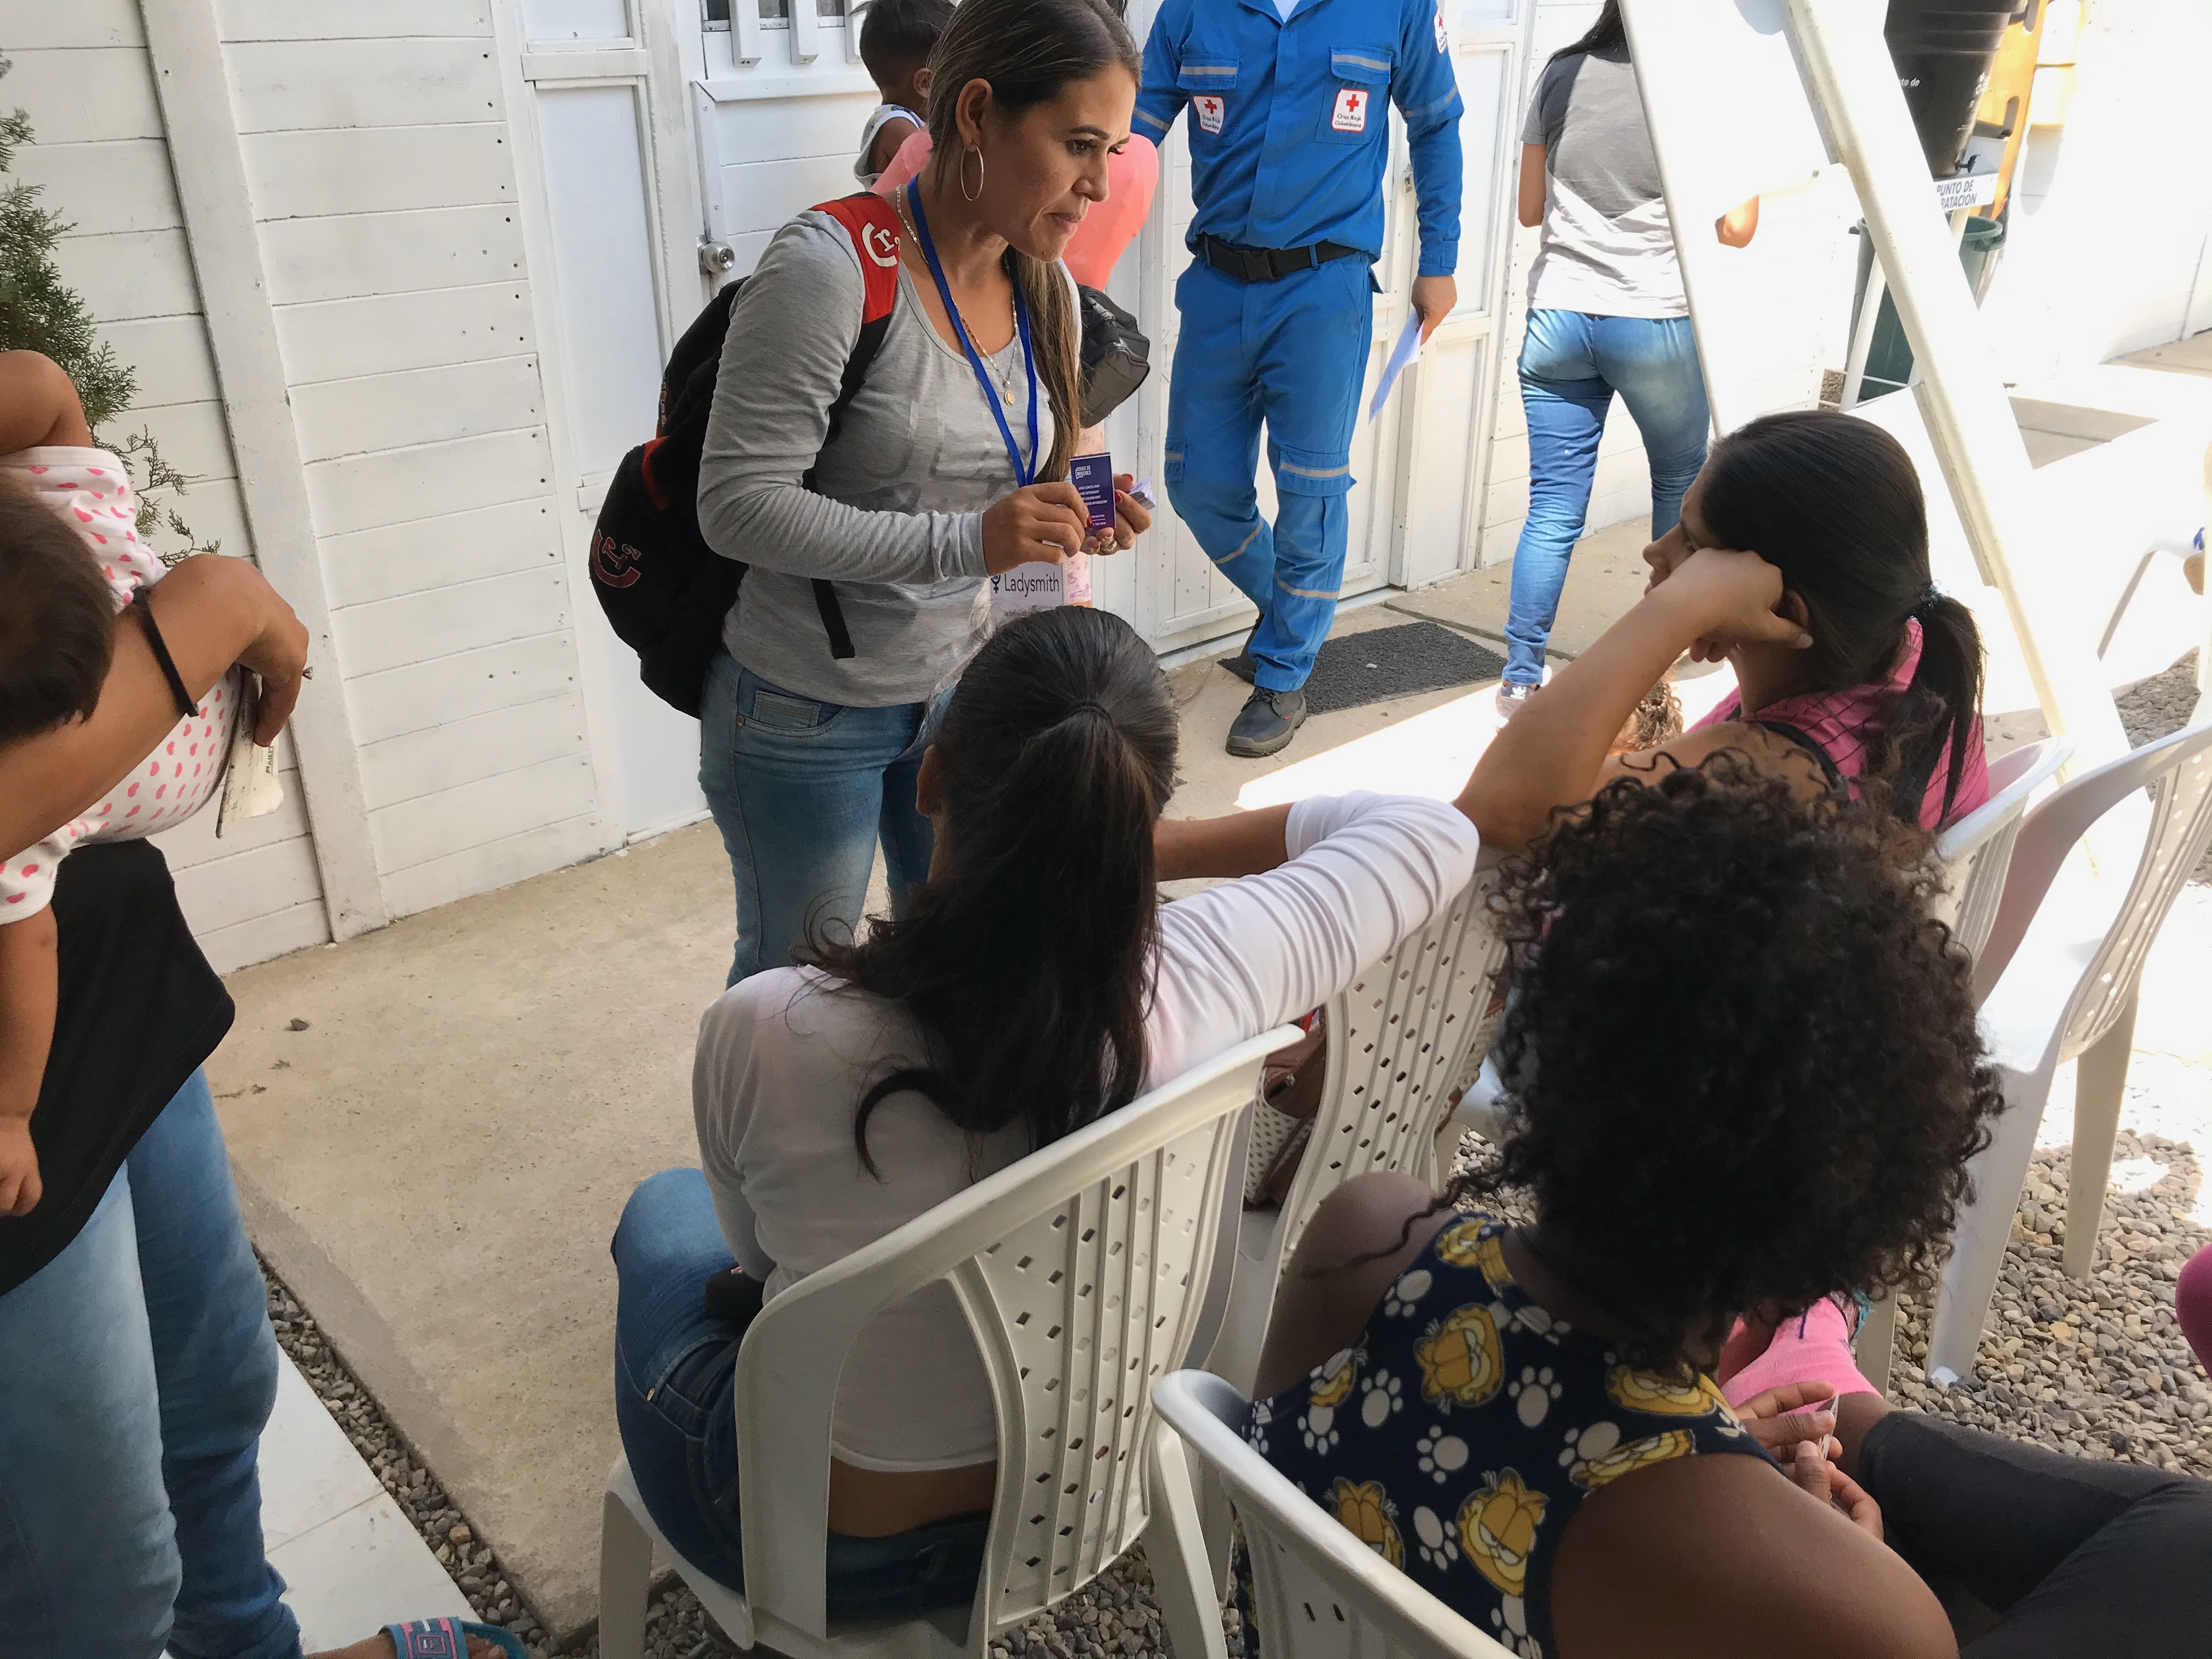 A social worker consults with women at Cosas de Mujeres in Colombia. Photo by Ladysmith